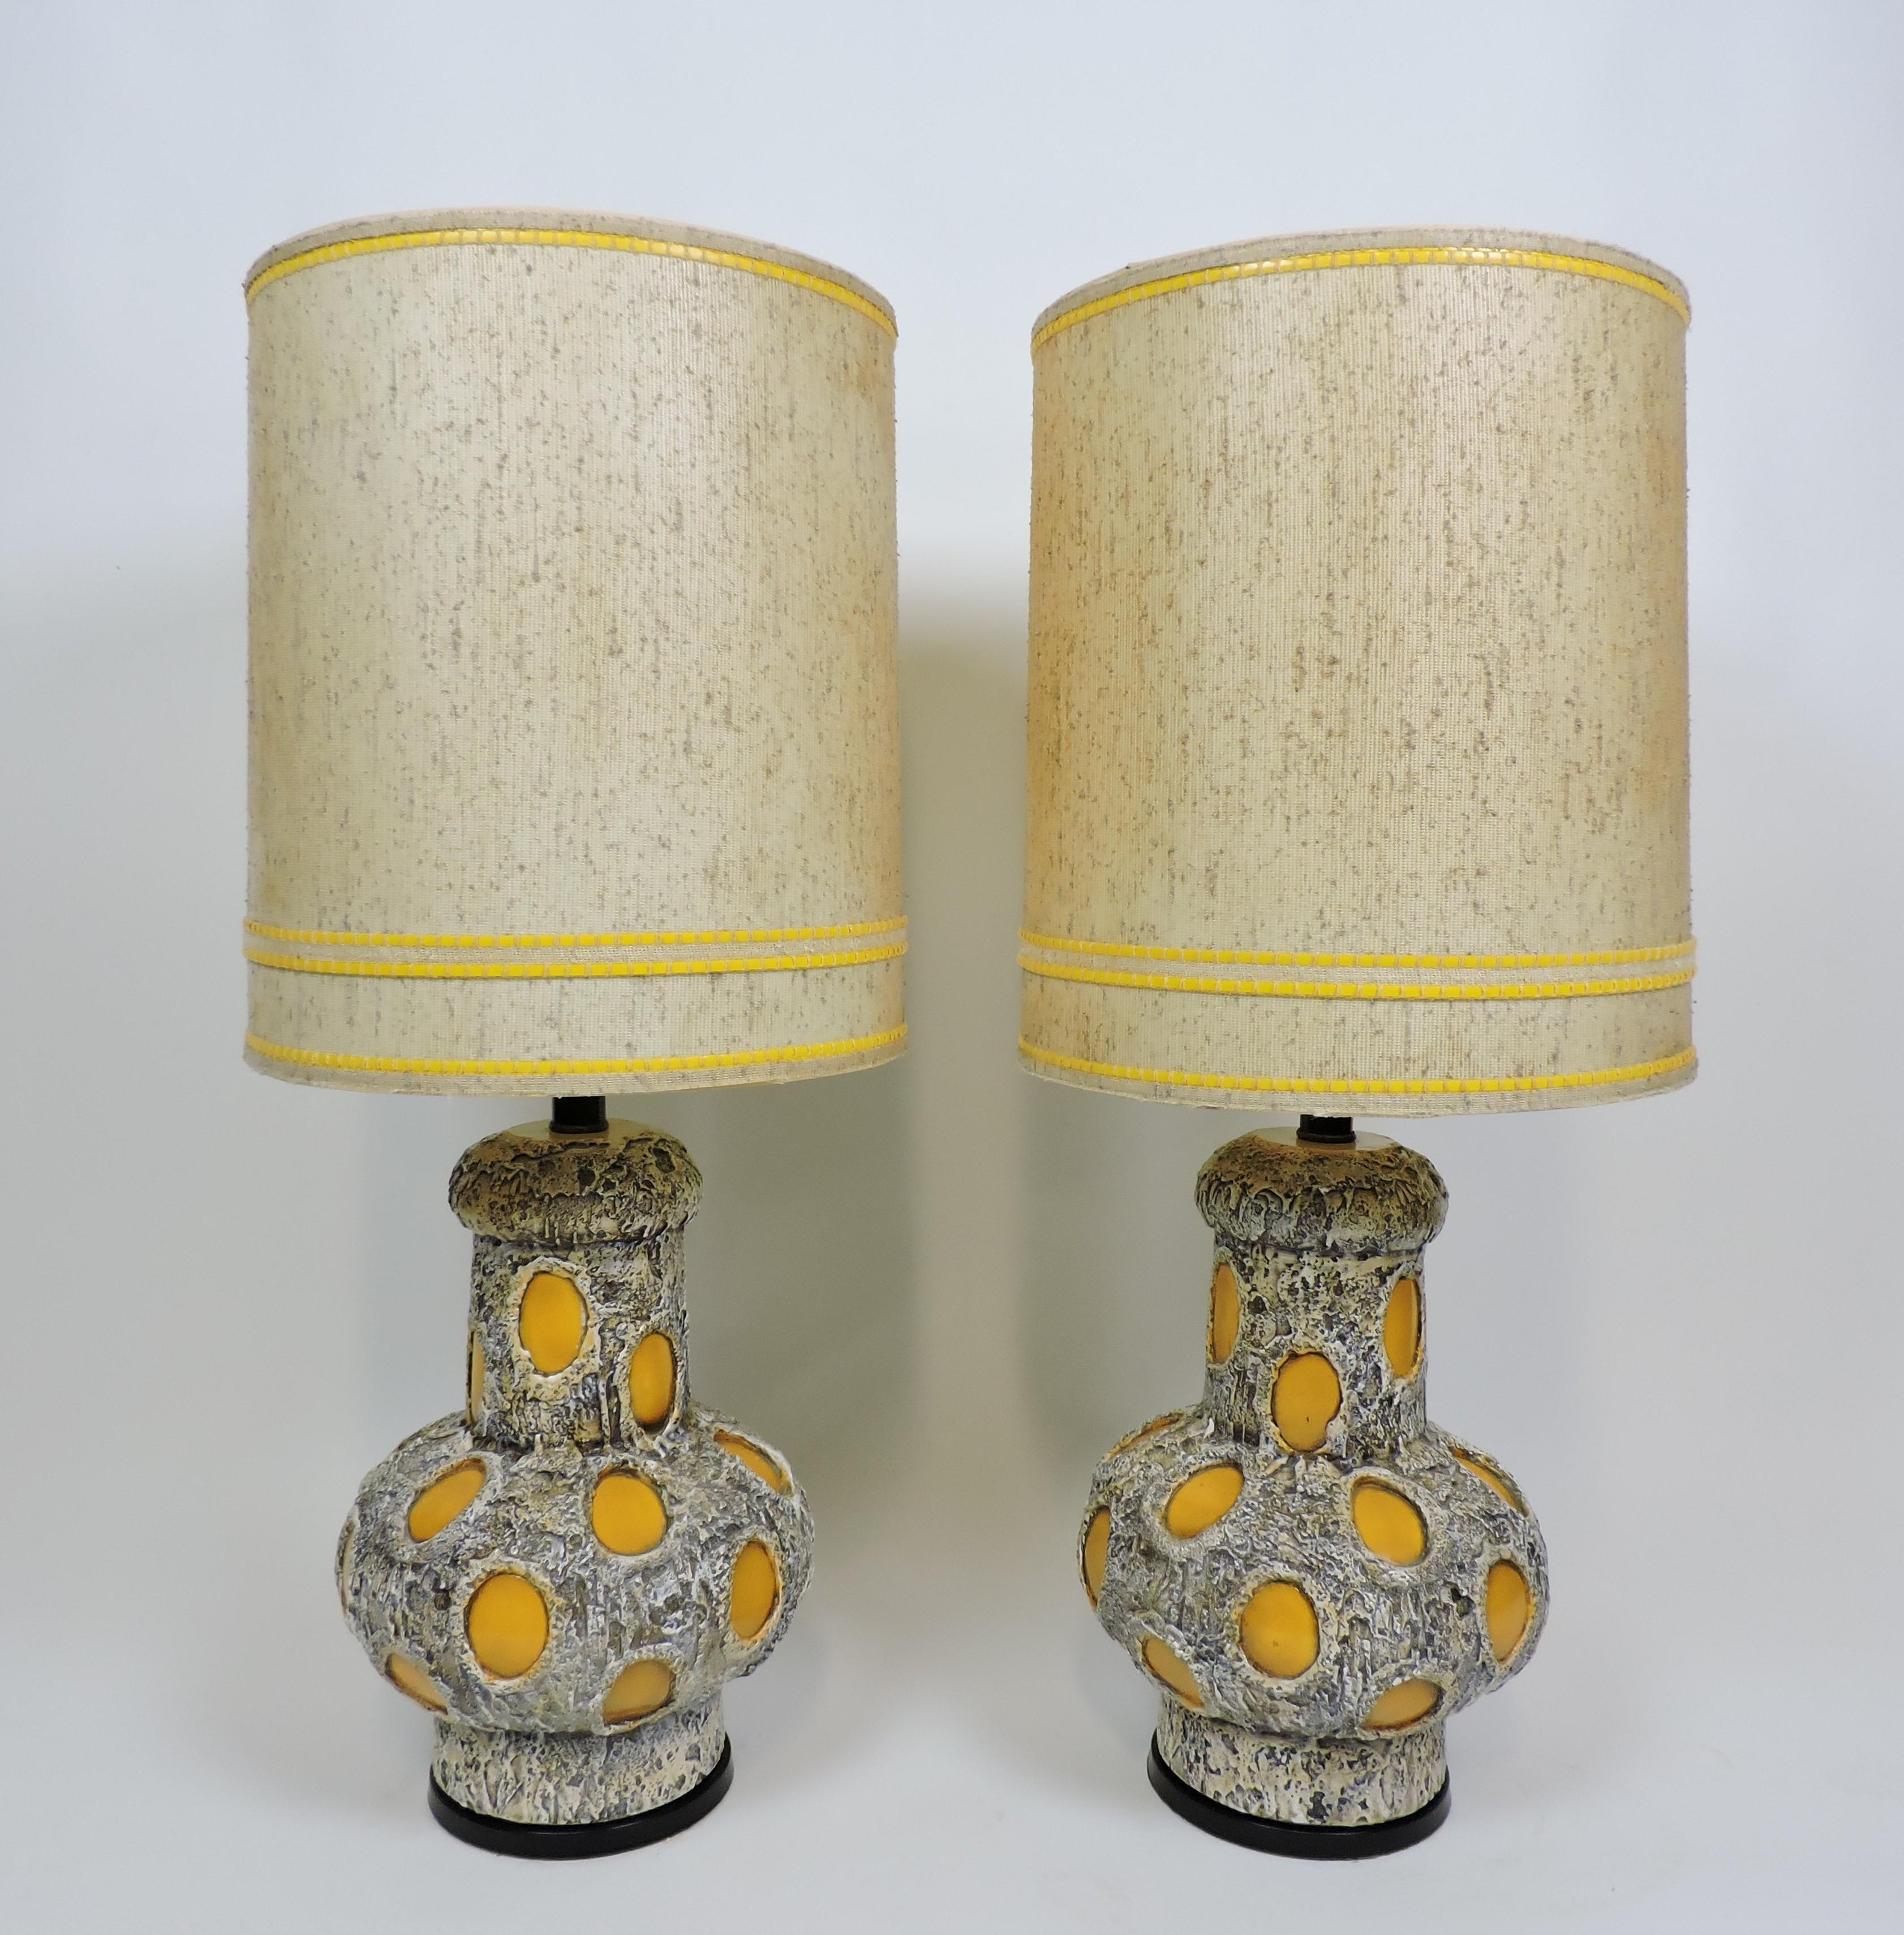 Fun and funky pair of large table lamps from 1975 by Italian designer, Pieri Tullio. These heavy and well-made lamps have a unique textured design and the original shades. Marked on bottom - 75 Pieri.
Just let us know if you would like to have them